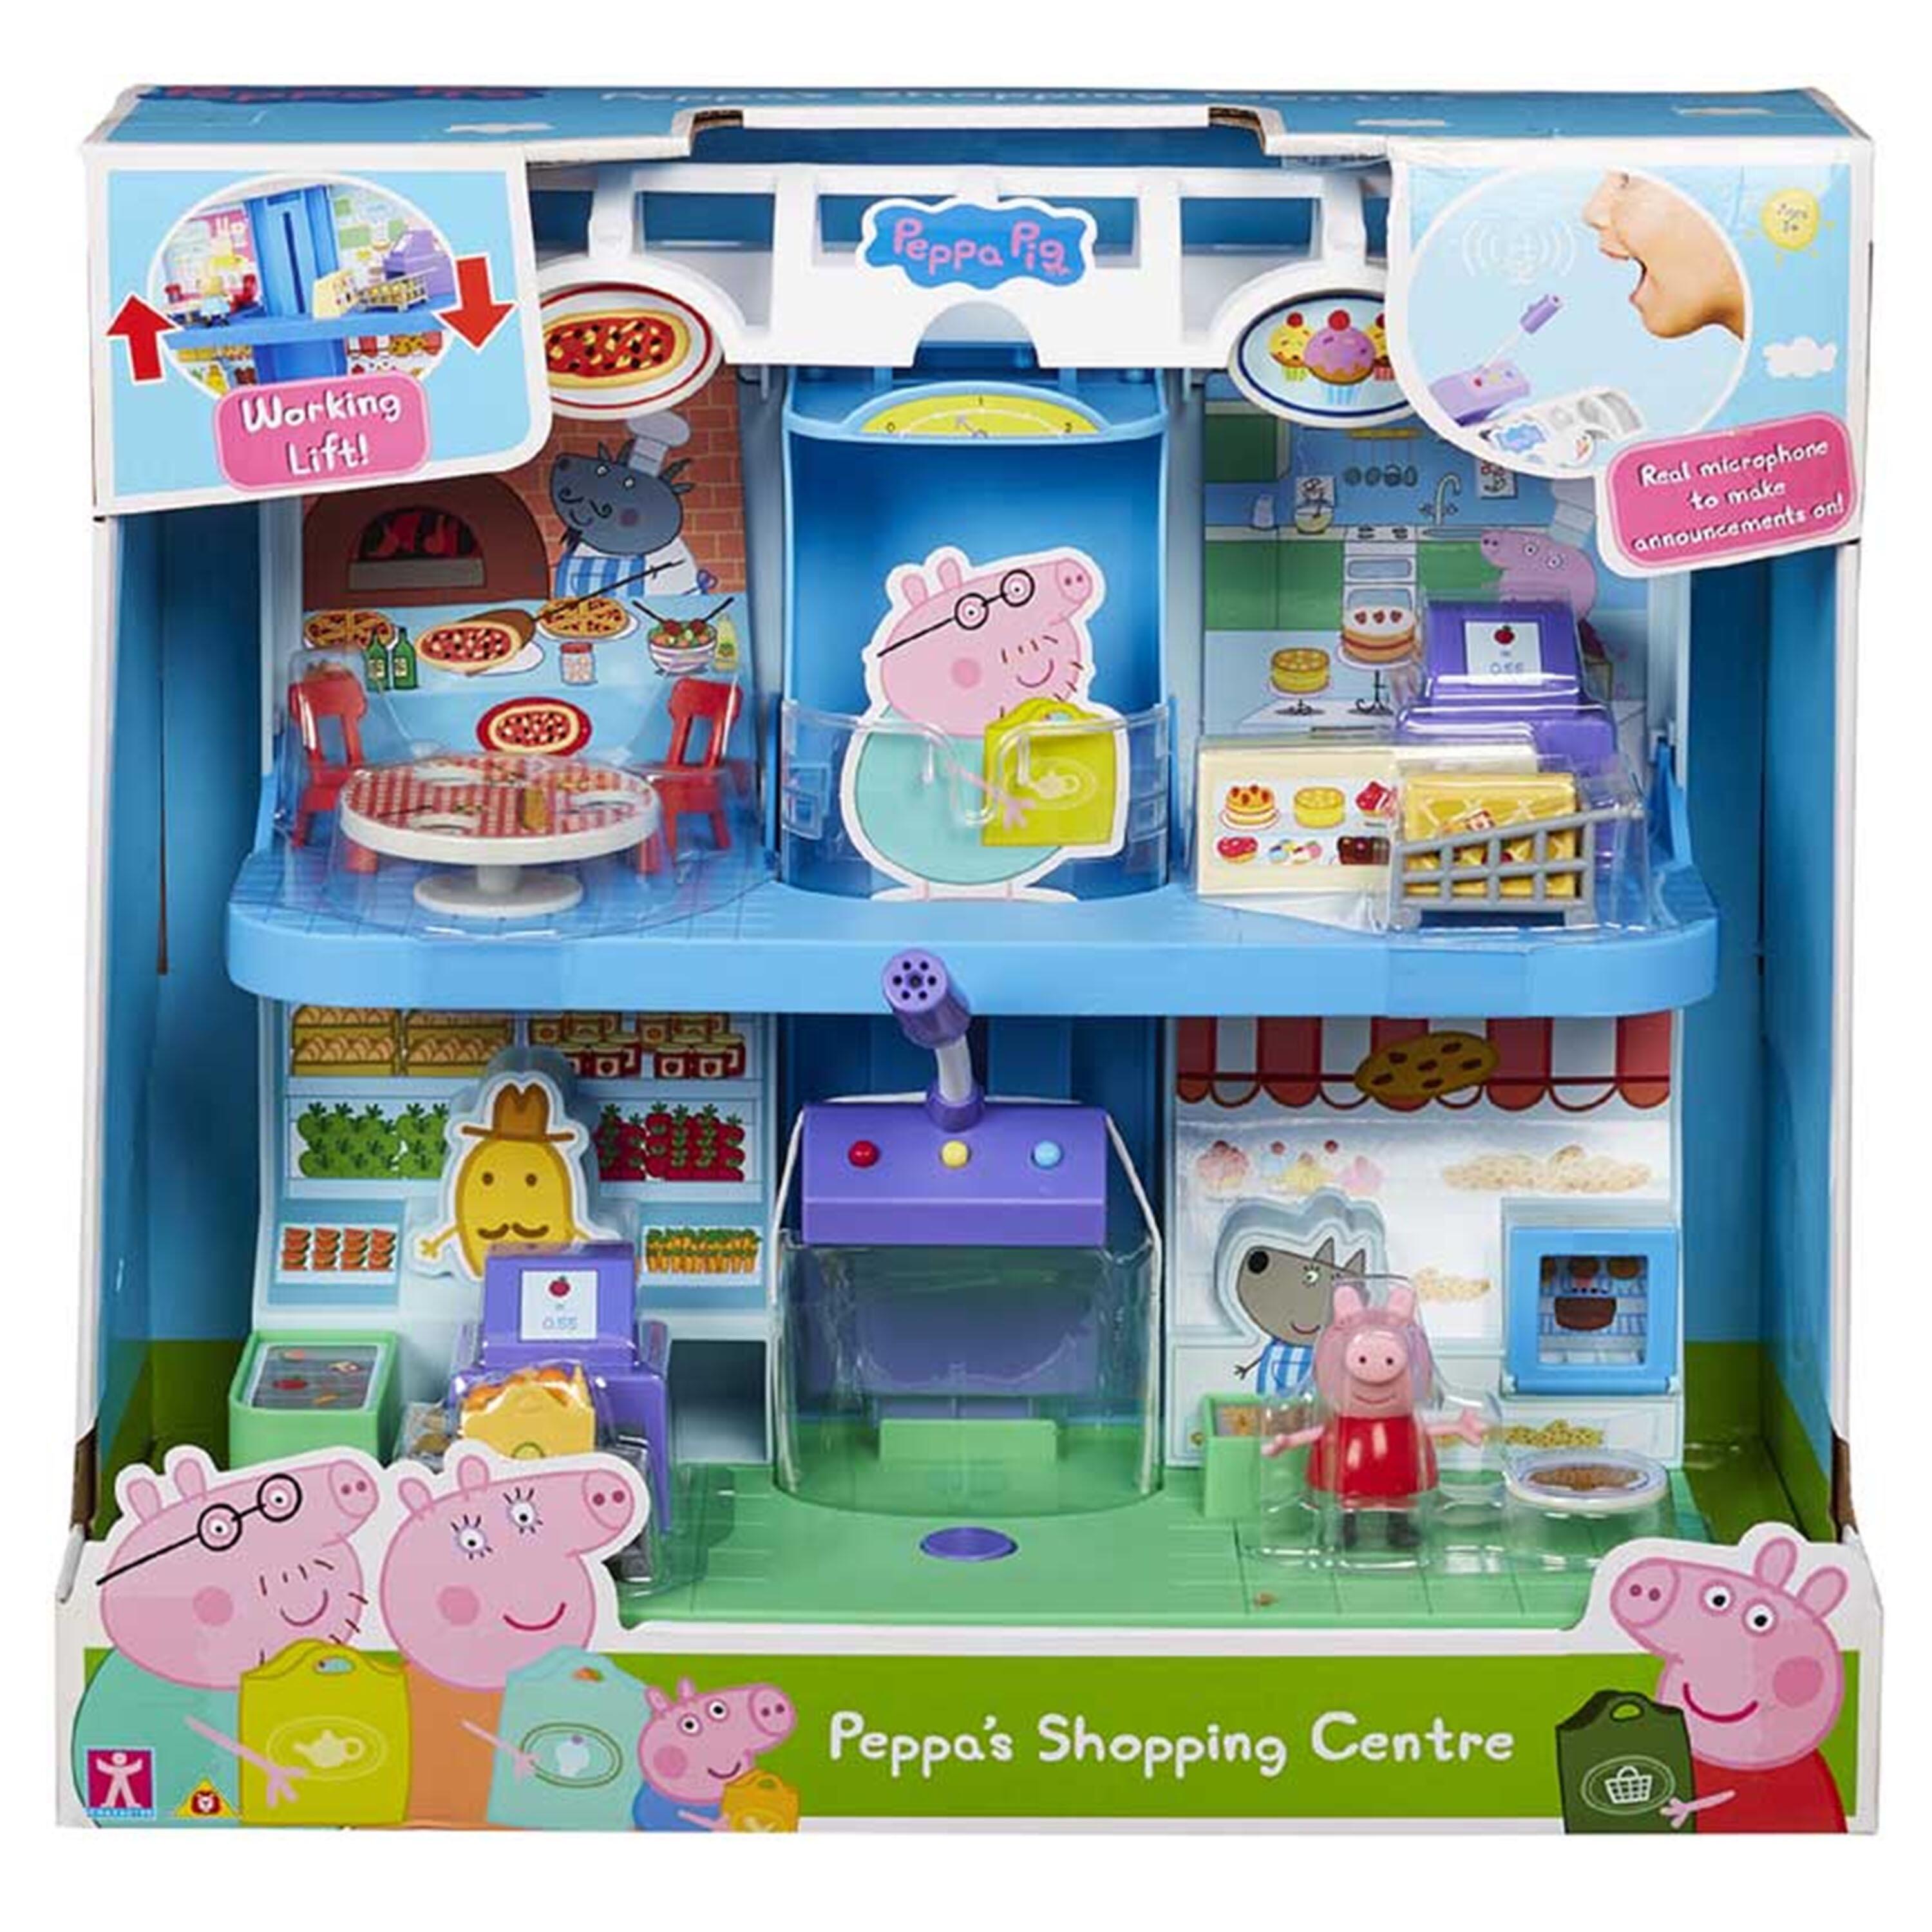 Peppa Pigs Shopping Centre